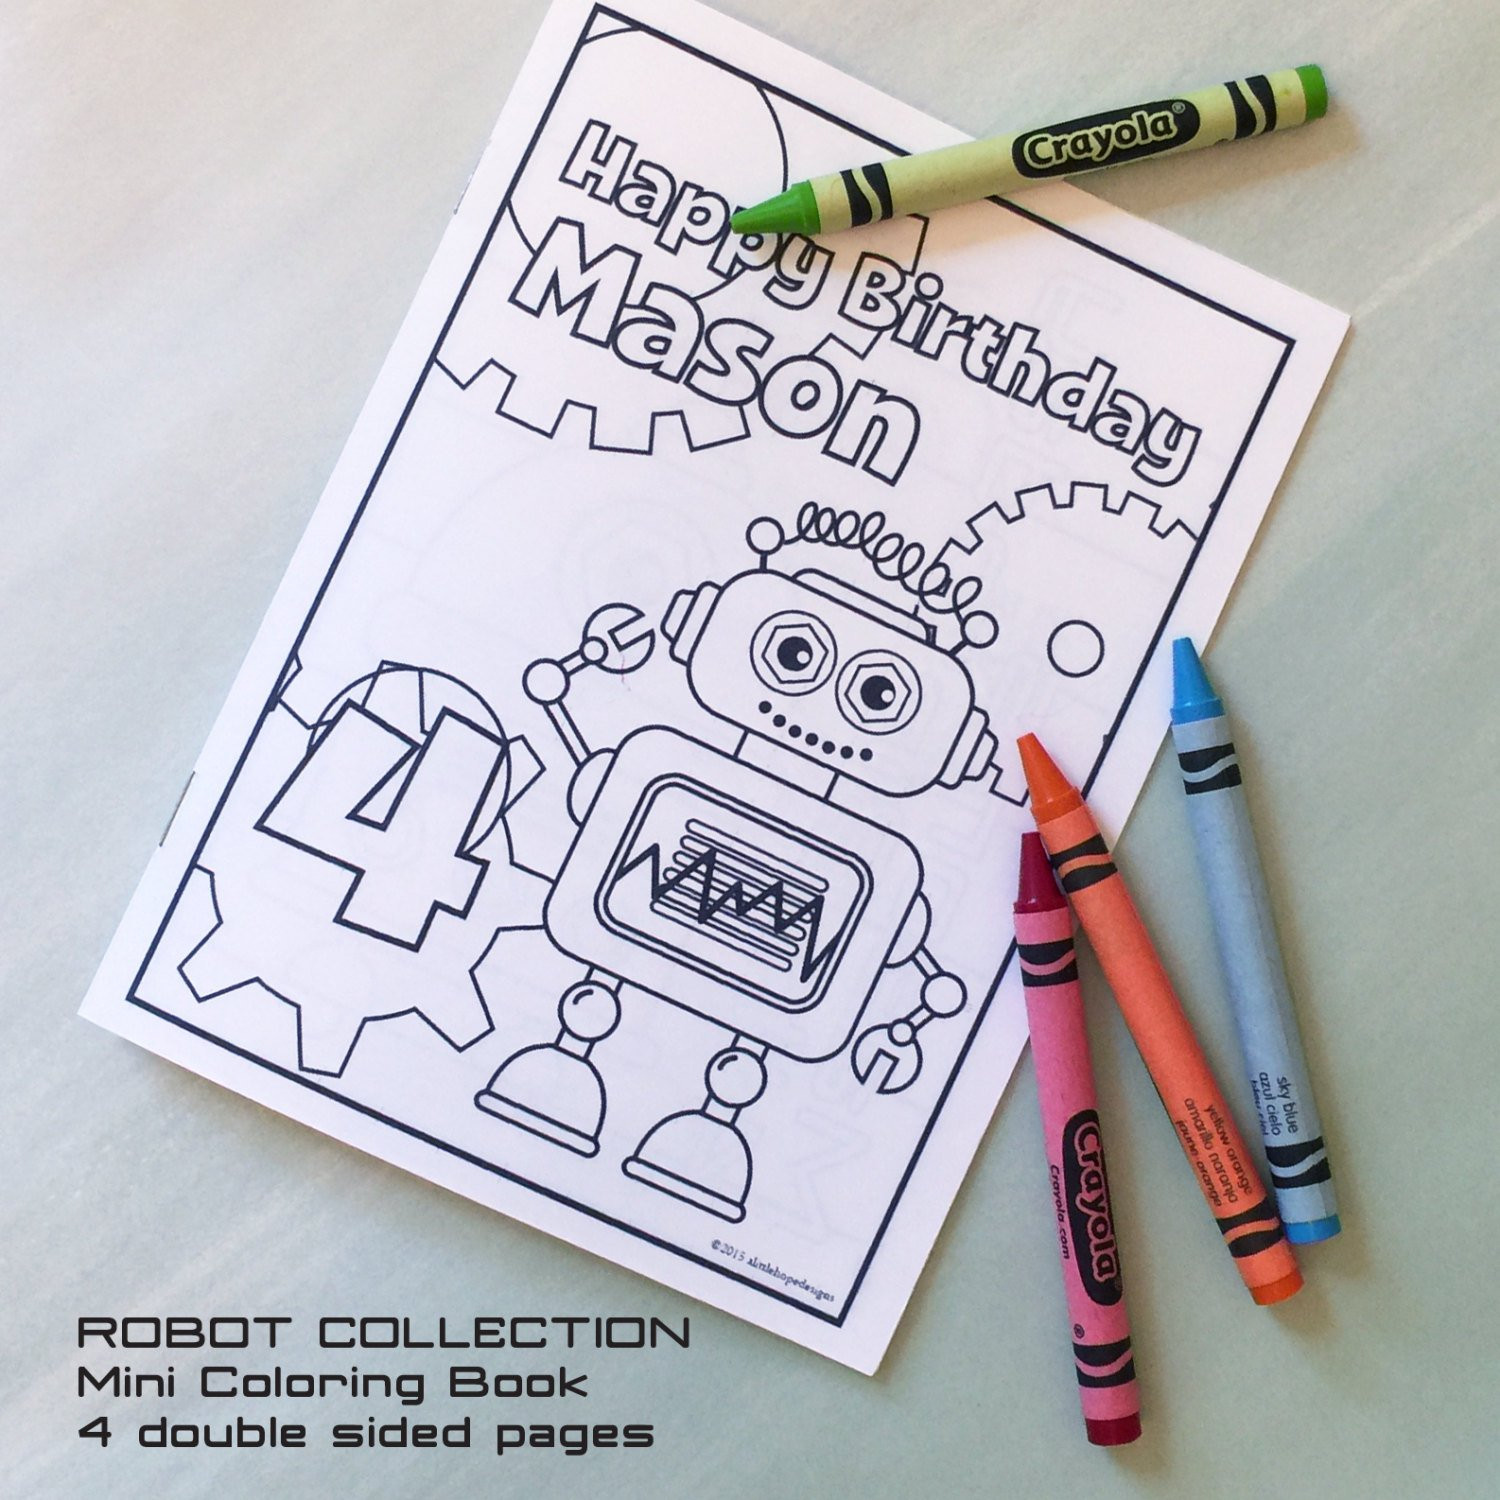 Personalized Coloring Books
 Coloring Book Robot Party Mini Coloring Book Personalized